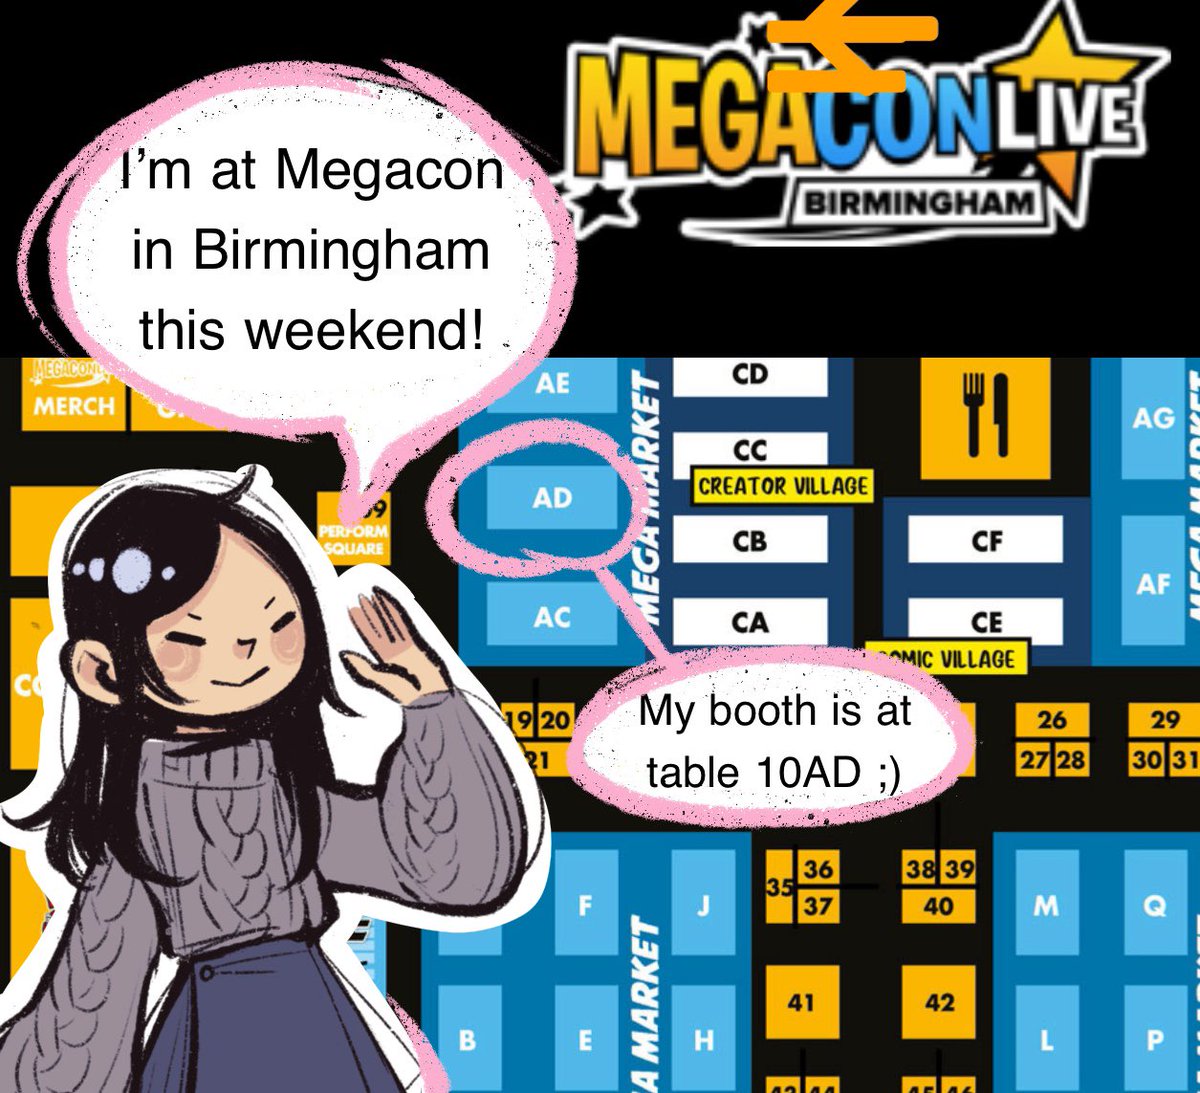 I’m tabling Megacon Birmingham this weekend!🇬🇧 Like wow, come say hi if you’re attending ;) let me seduce you with my bad fake British accent